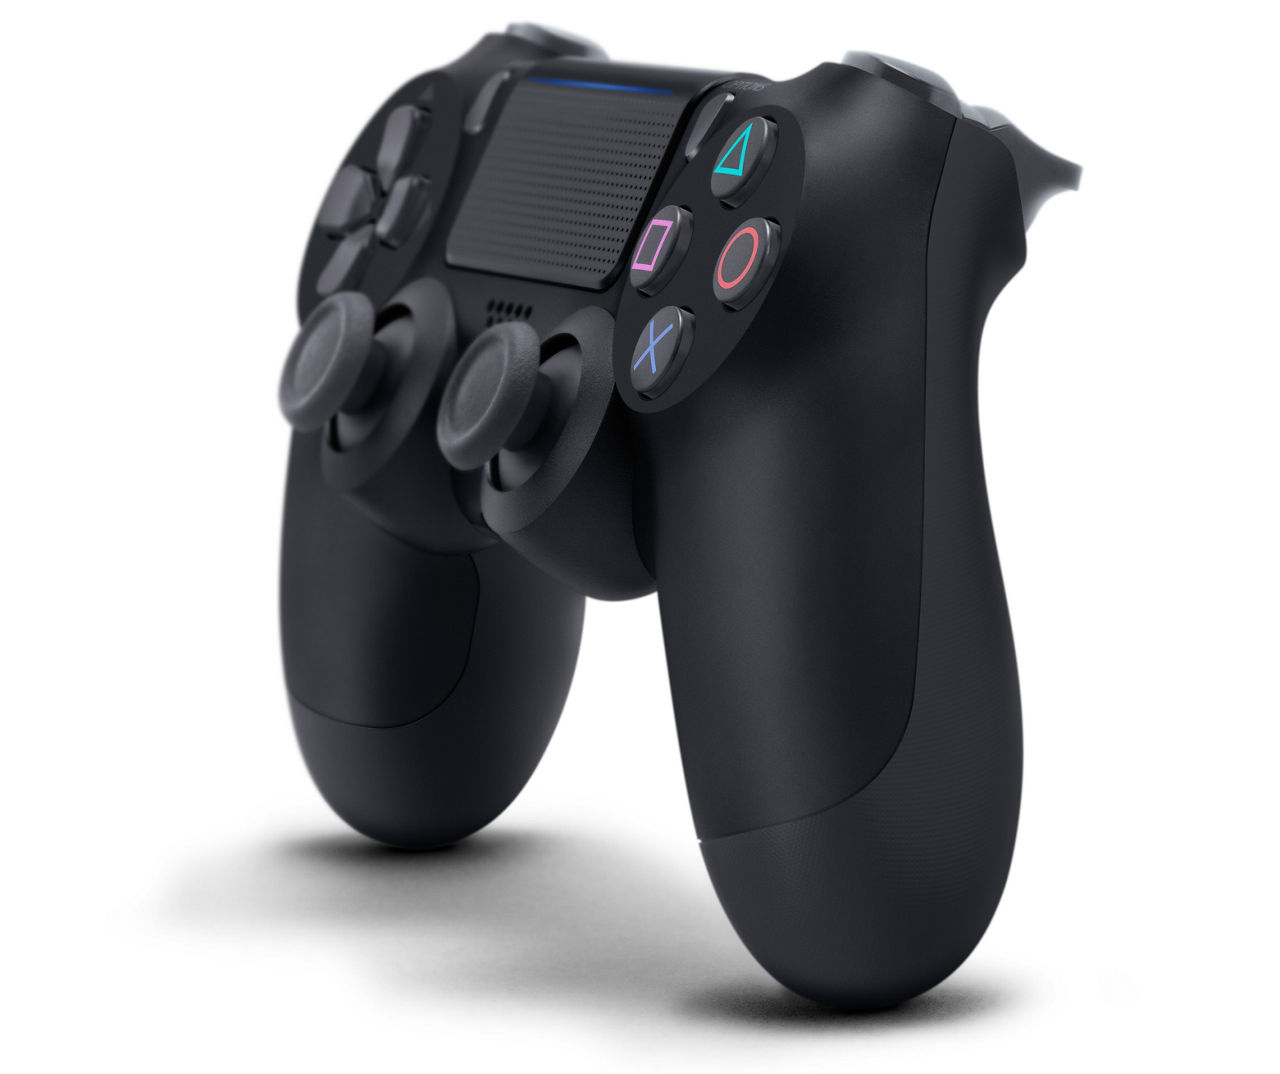 Signal Ung dame egyptisk Sony Black DualShock 4 Wireless PS4 Controller | Big Lots